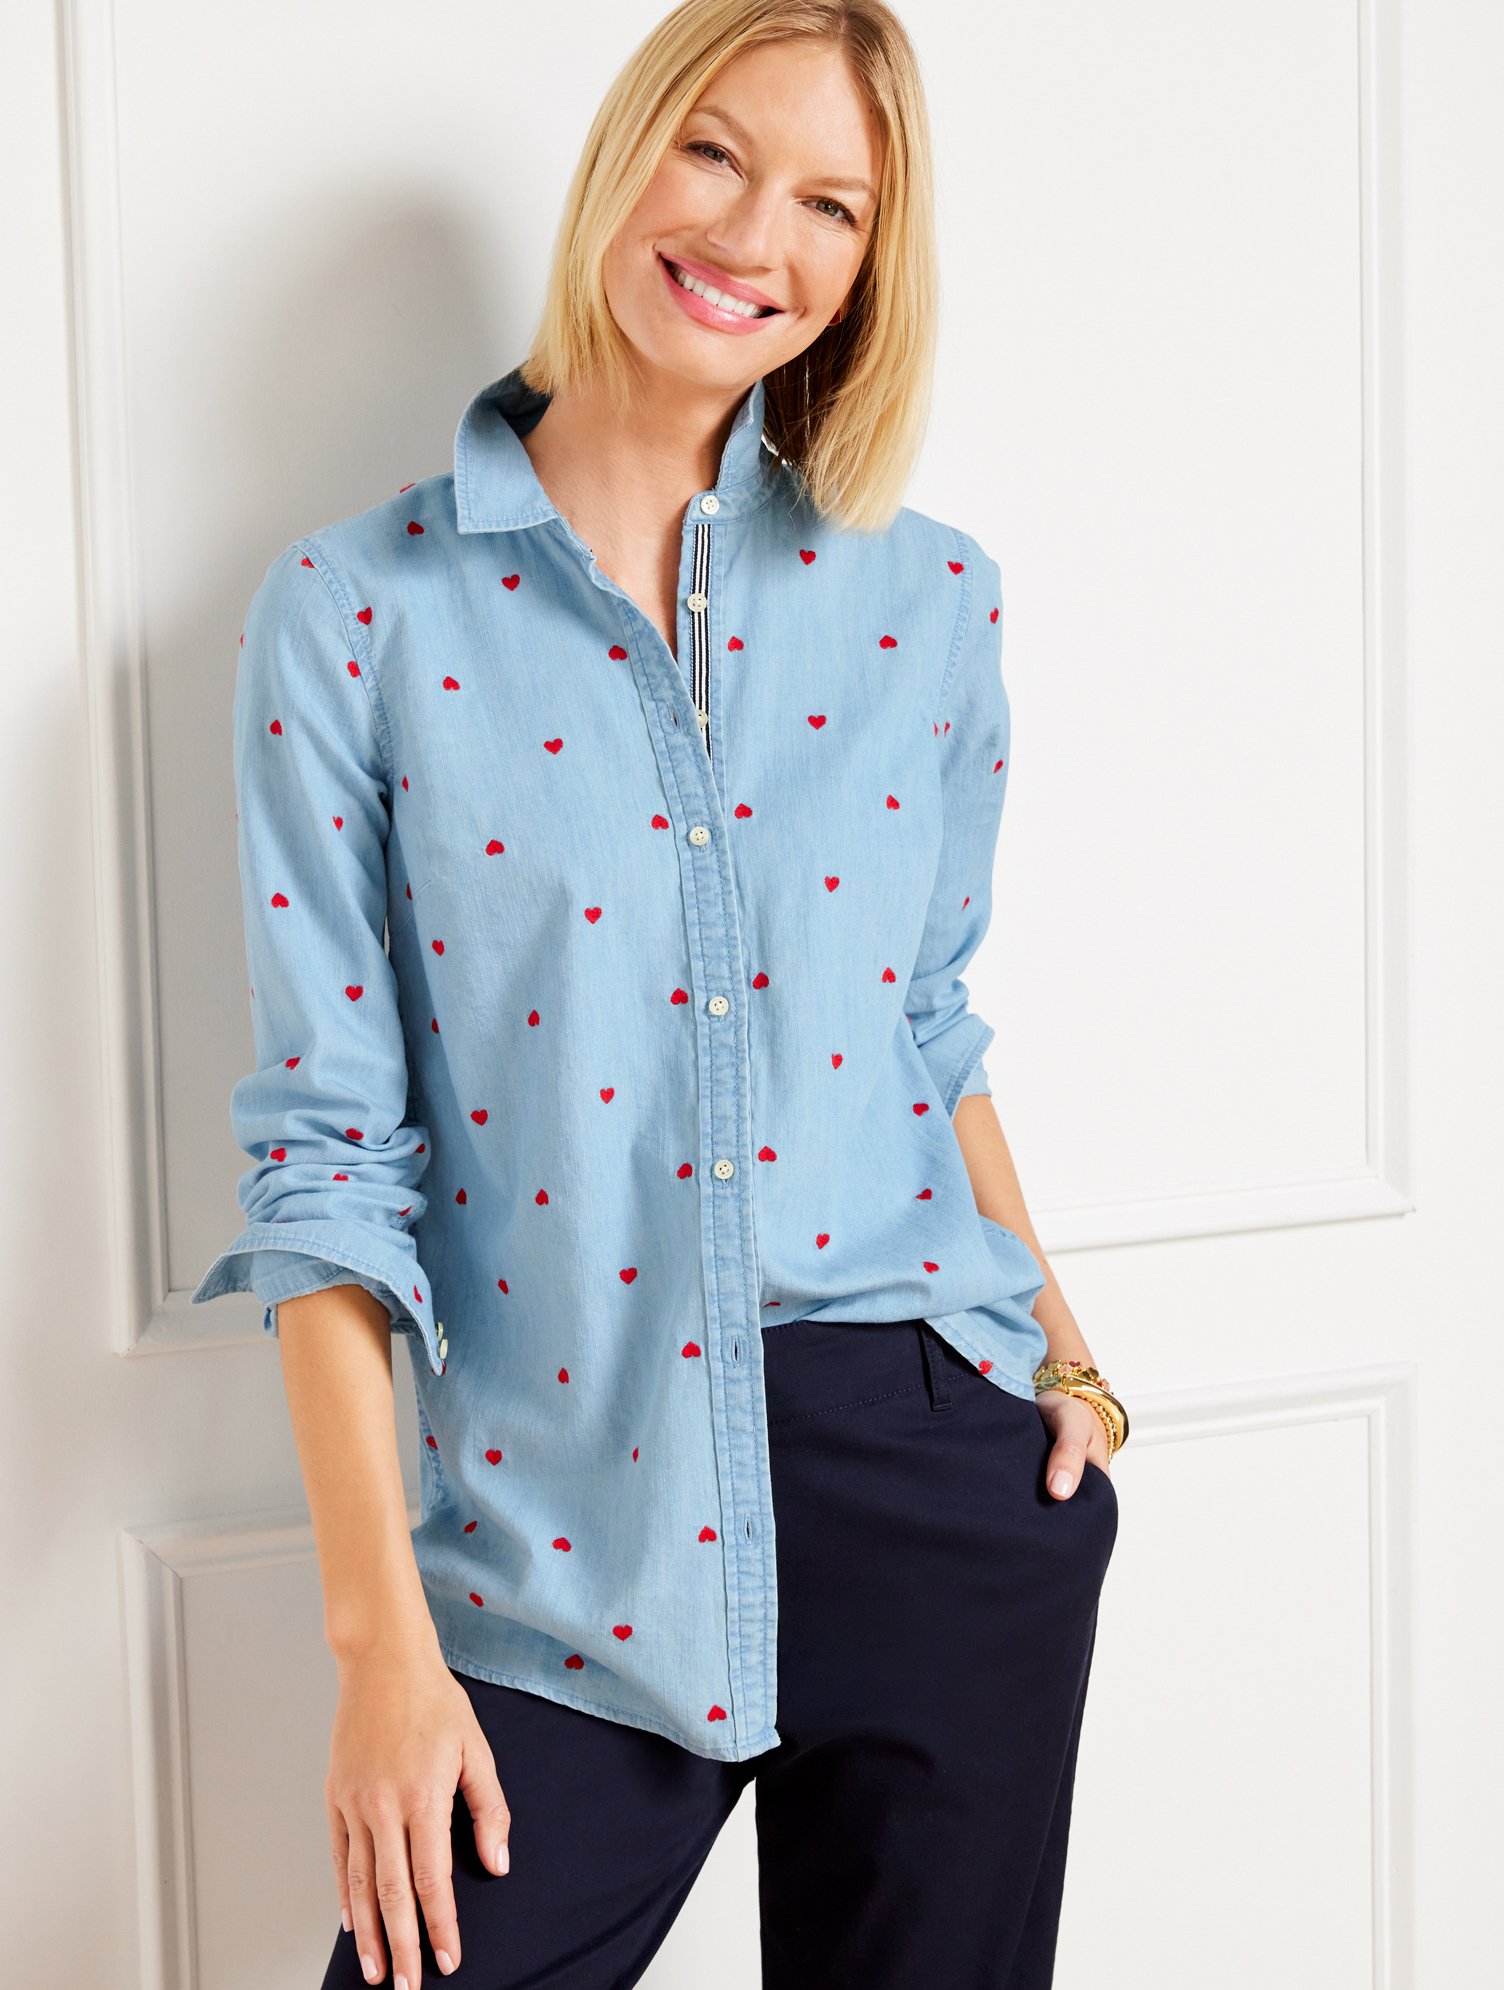 Talbots Petite - Denim Button Front Shirt - Embroidered Hearts - Light Blue/red - Xl - 100% Cotton  In Light Blue,red